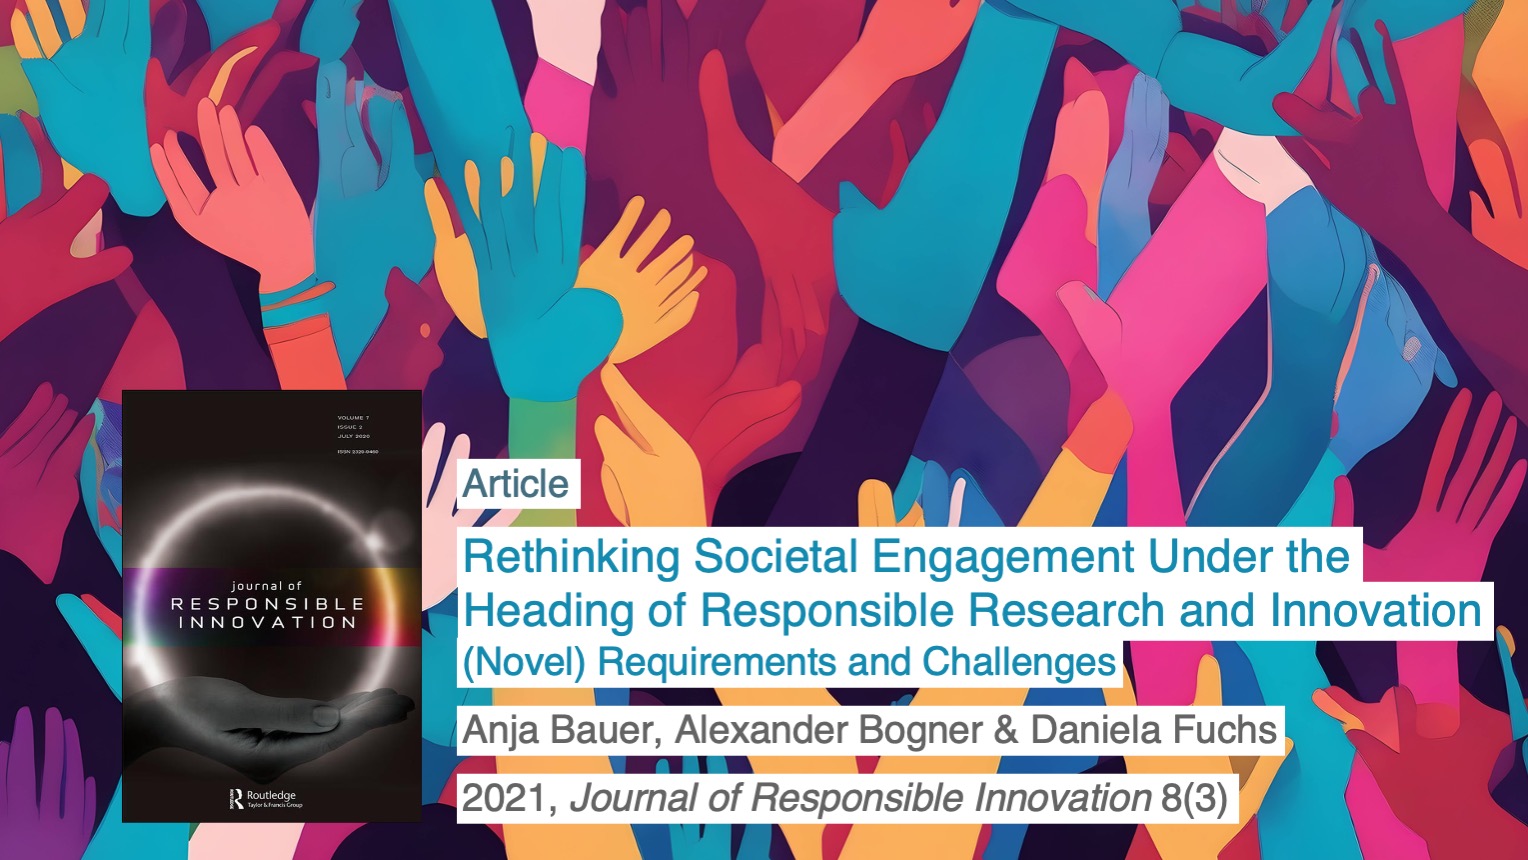 Anja Bauer, Alexander Bogner, Daniela Fuchs: Rethinking Socieltal Engagnement Under the Heading of Responsible Research and Innovation (Novel) Requirements and Challenges. 2021, Journal of Responsible Innovation 8(3).